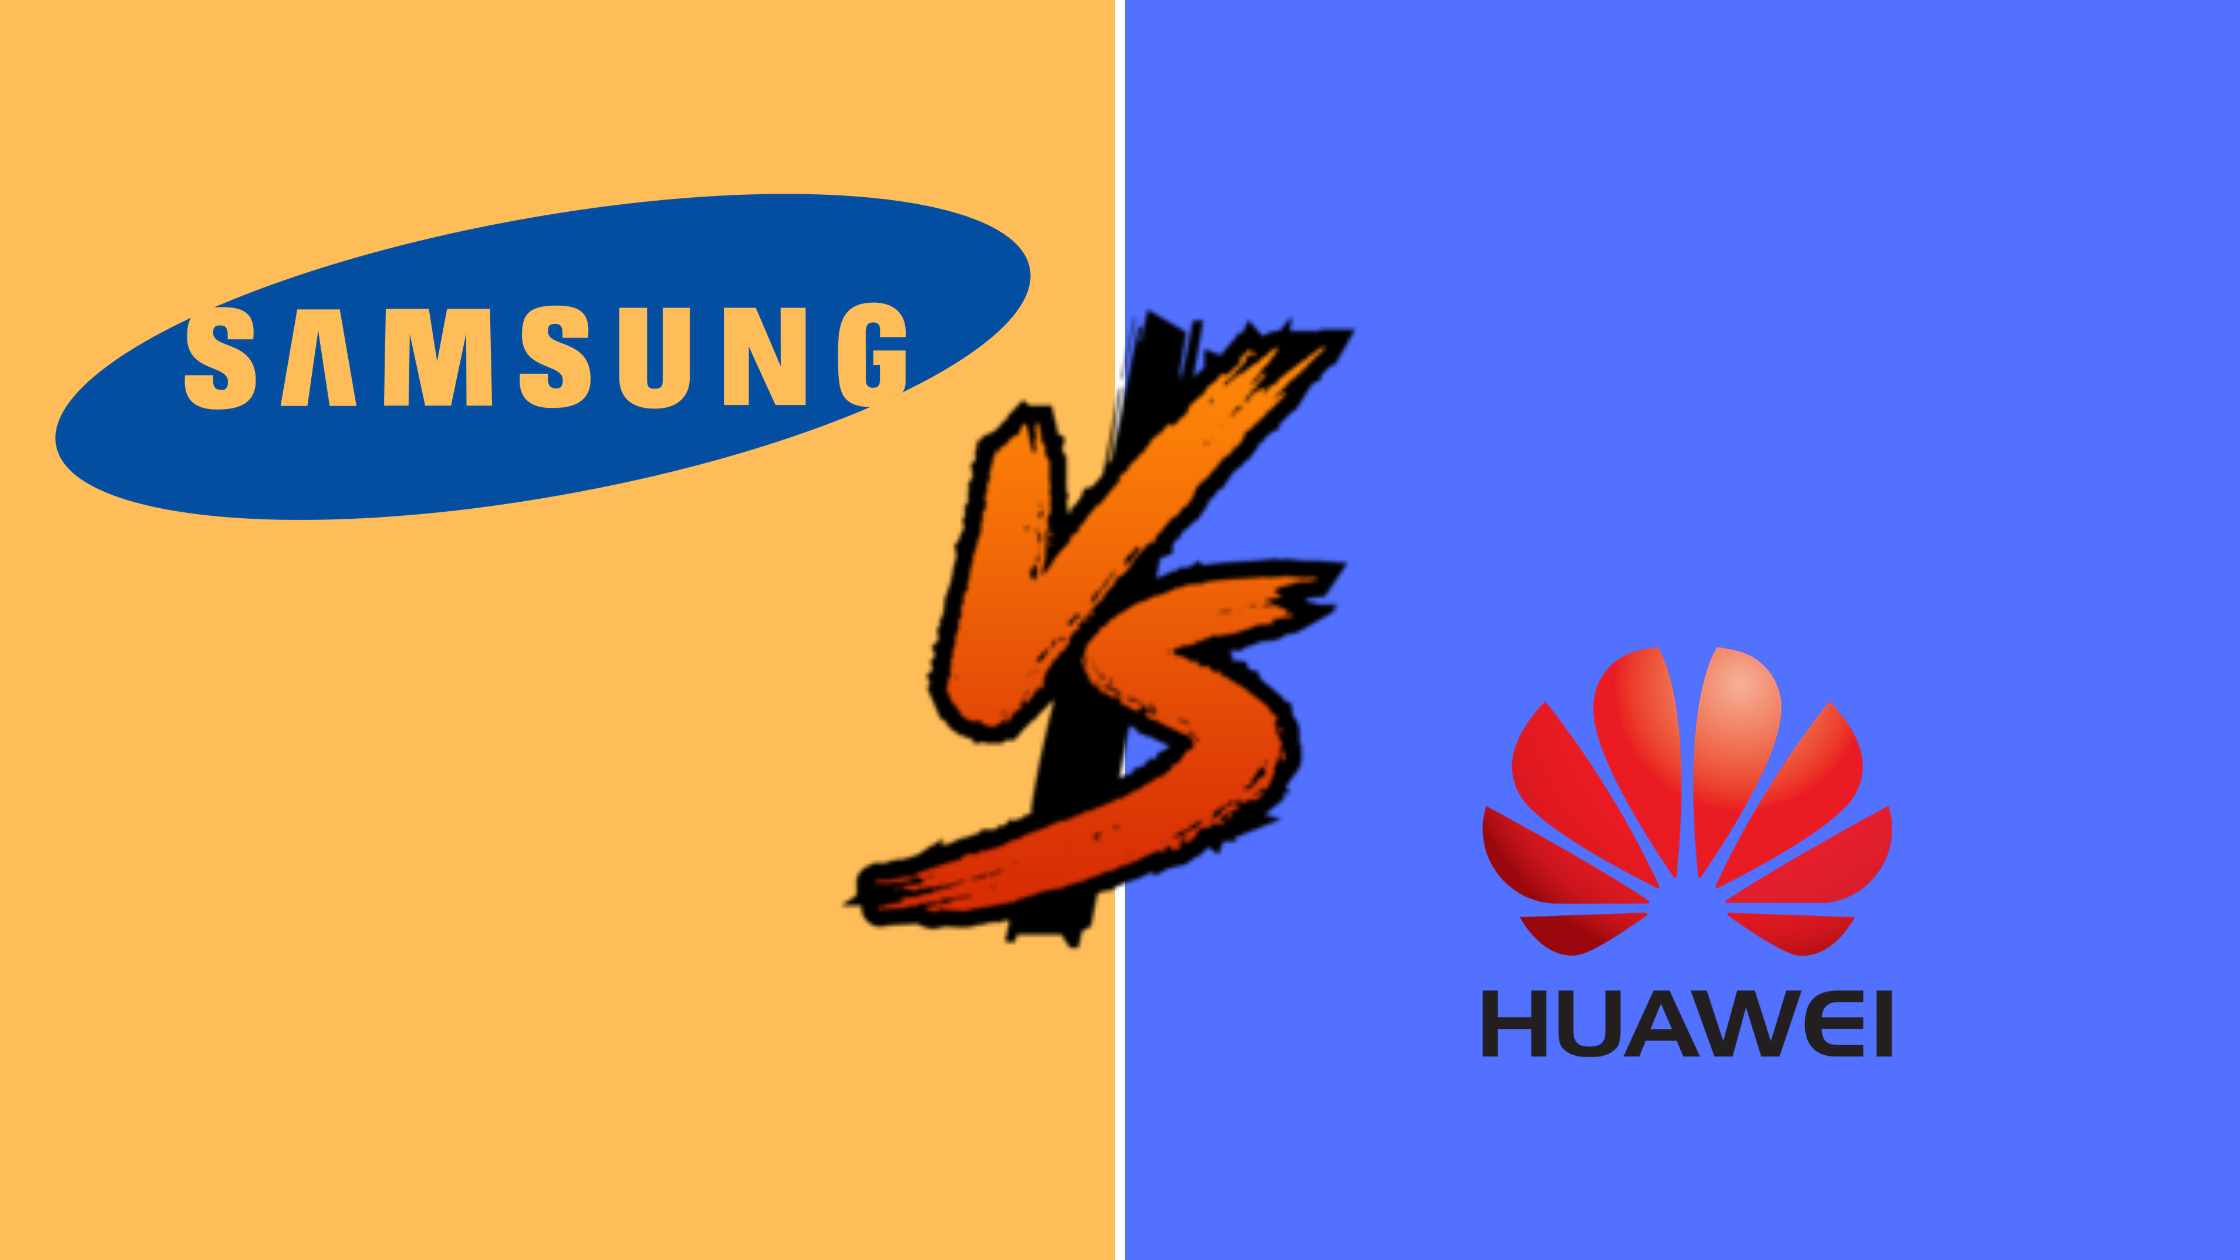 Huawei Overtakes Samsung Huawei Managed To Ship Most Phones In Q2 2020